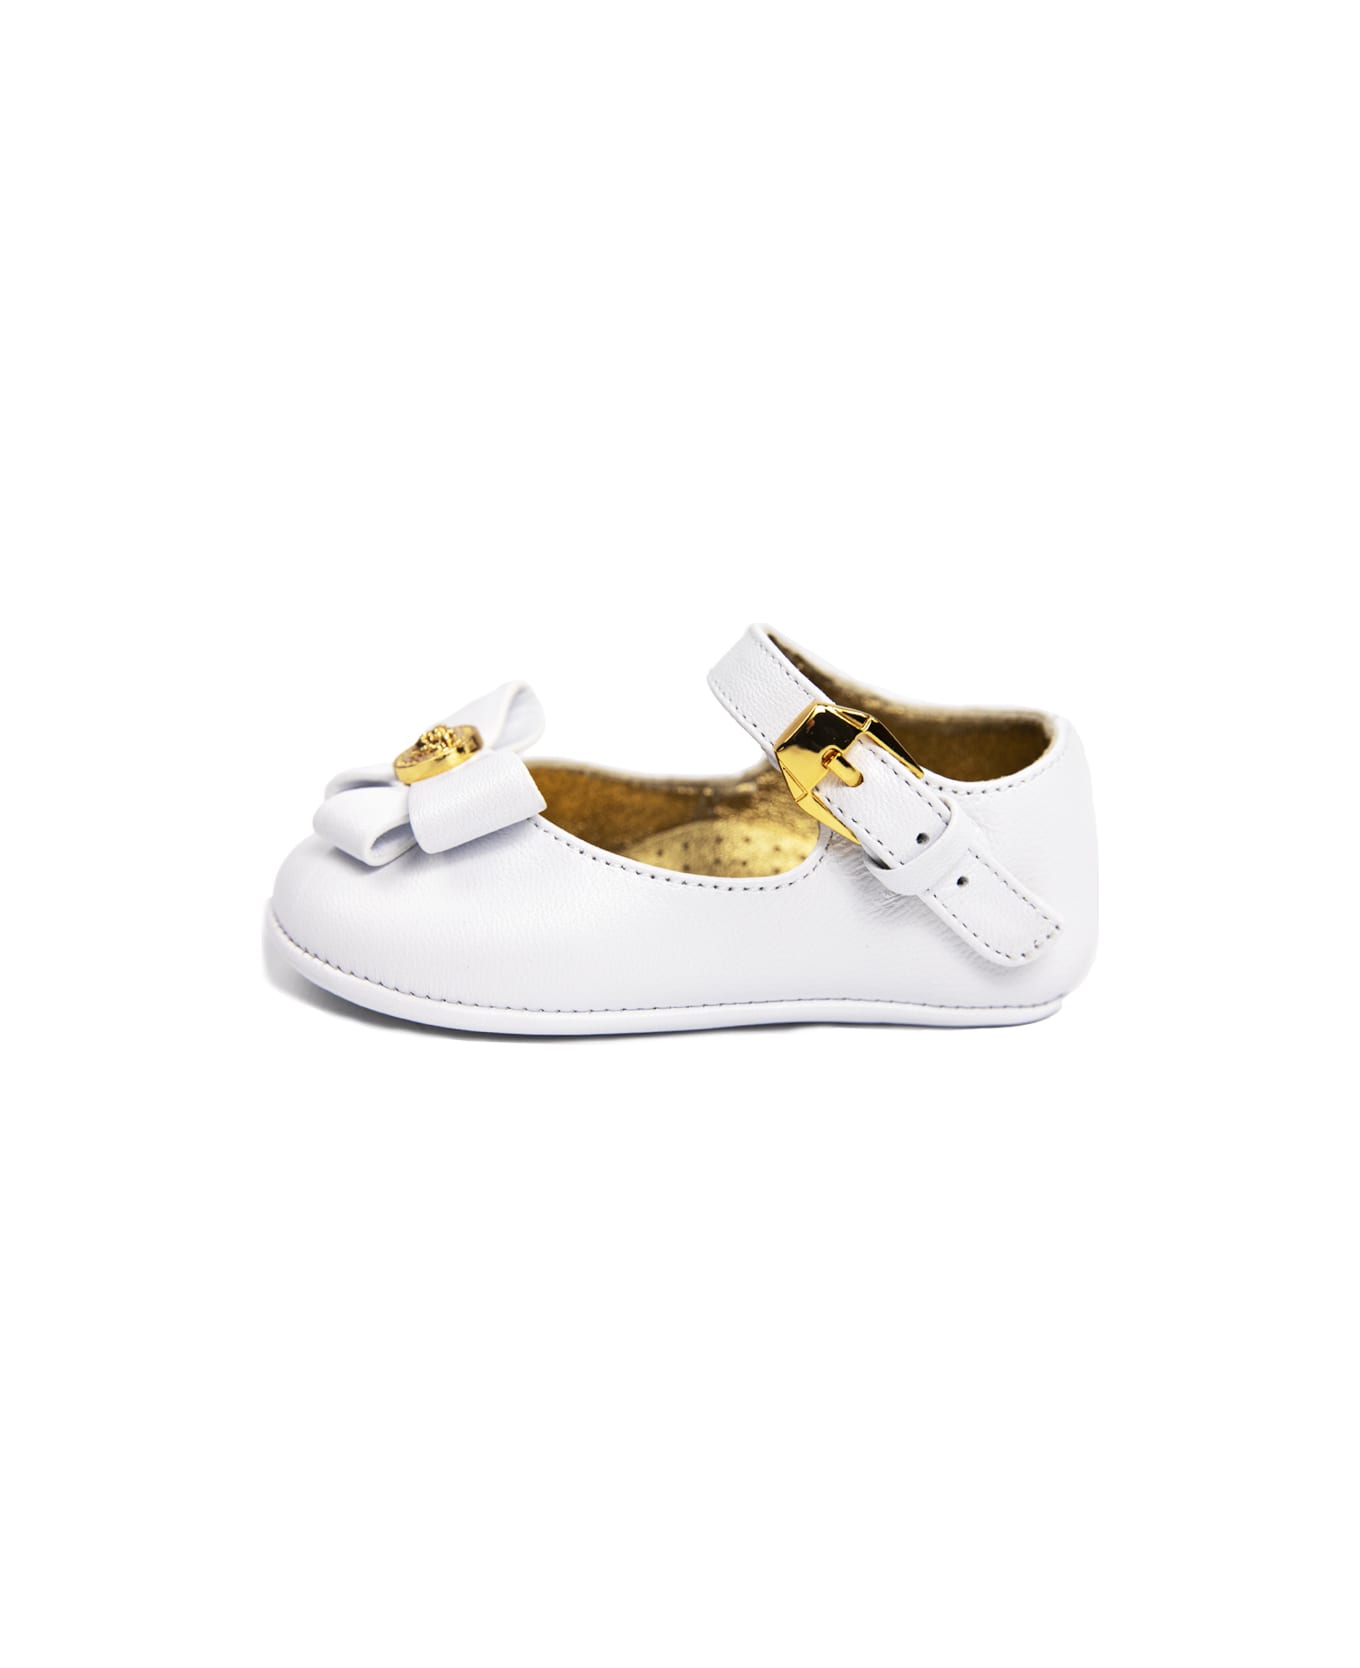 Versace Wagtail - White